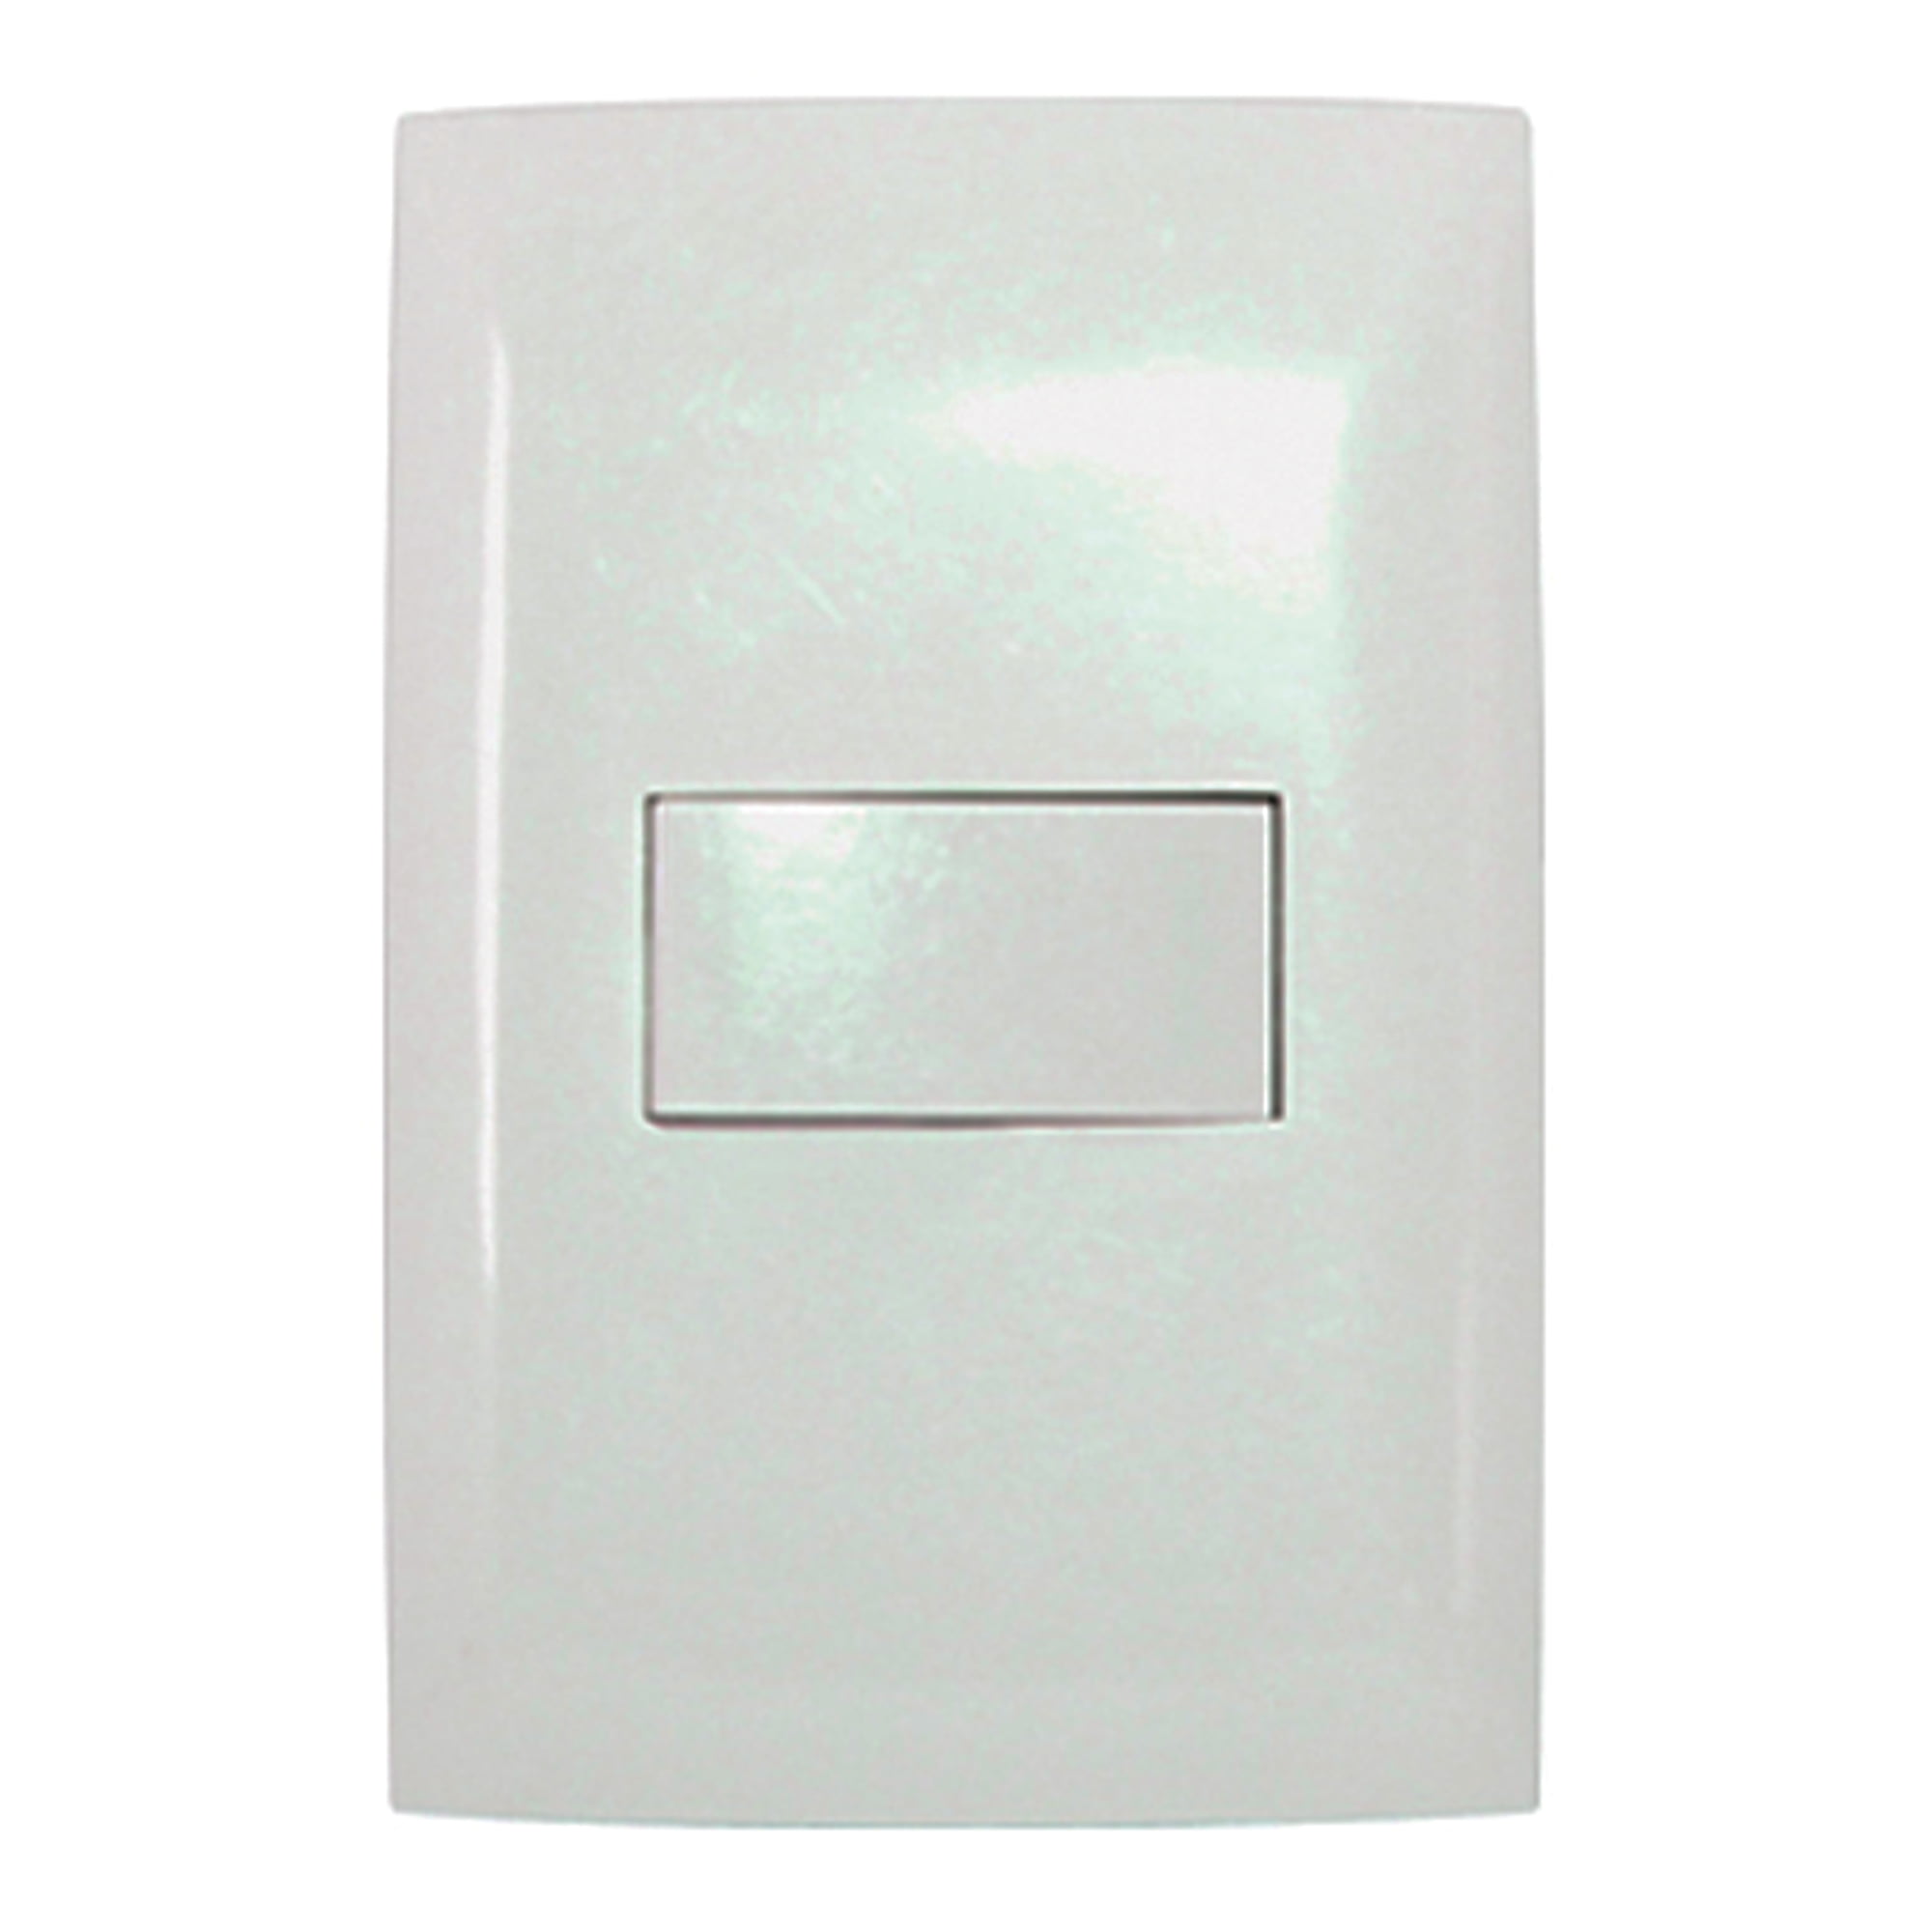 TOMA SIMPLE UNIVERSAL 10A L/T 250V GRIS